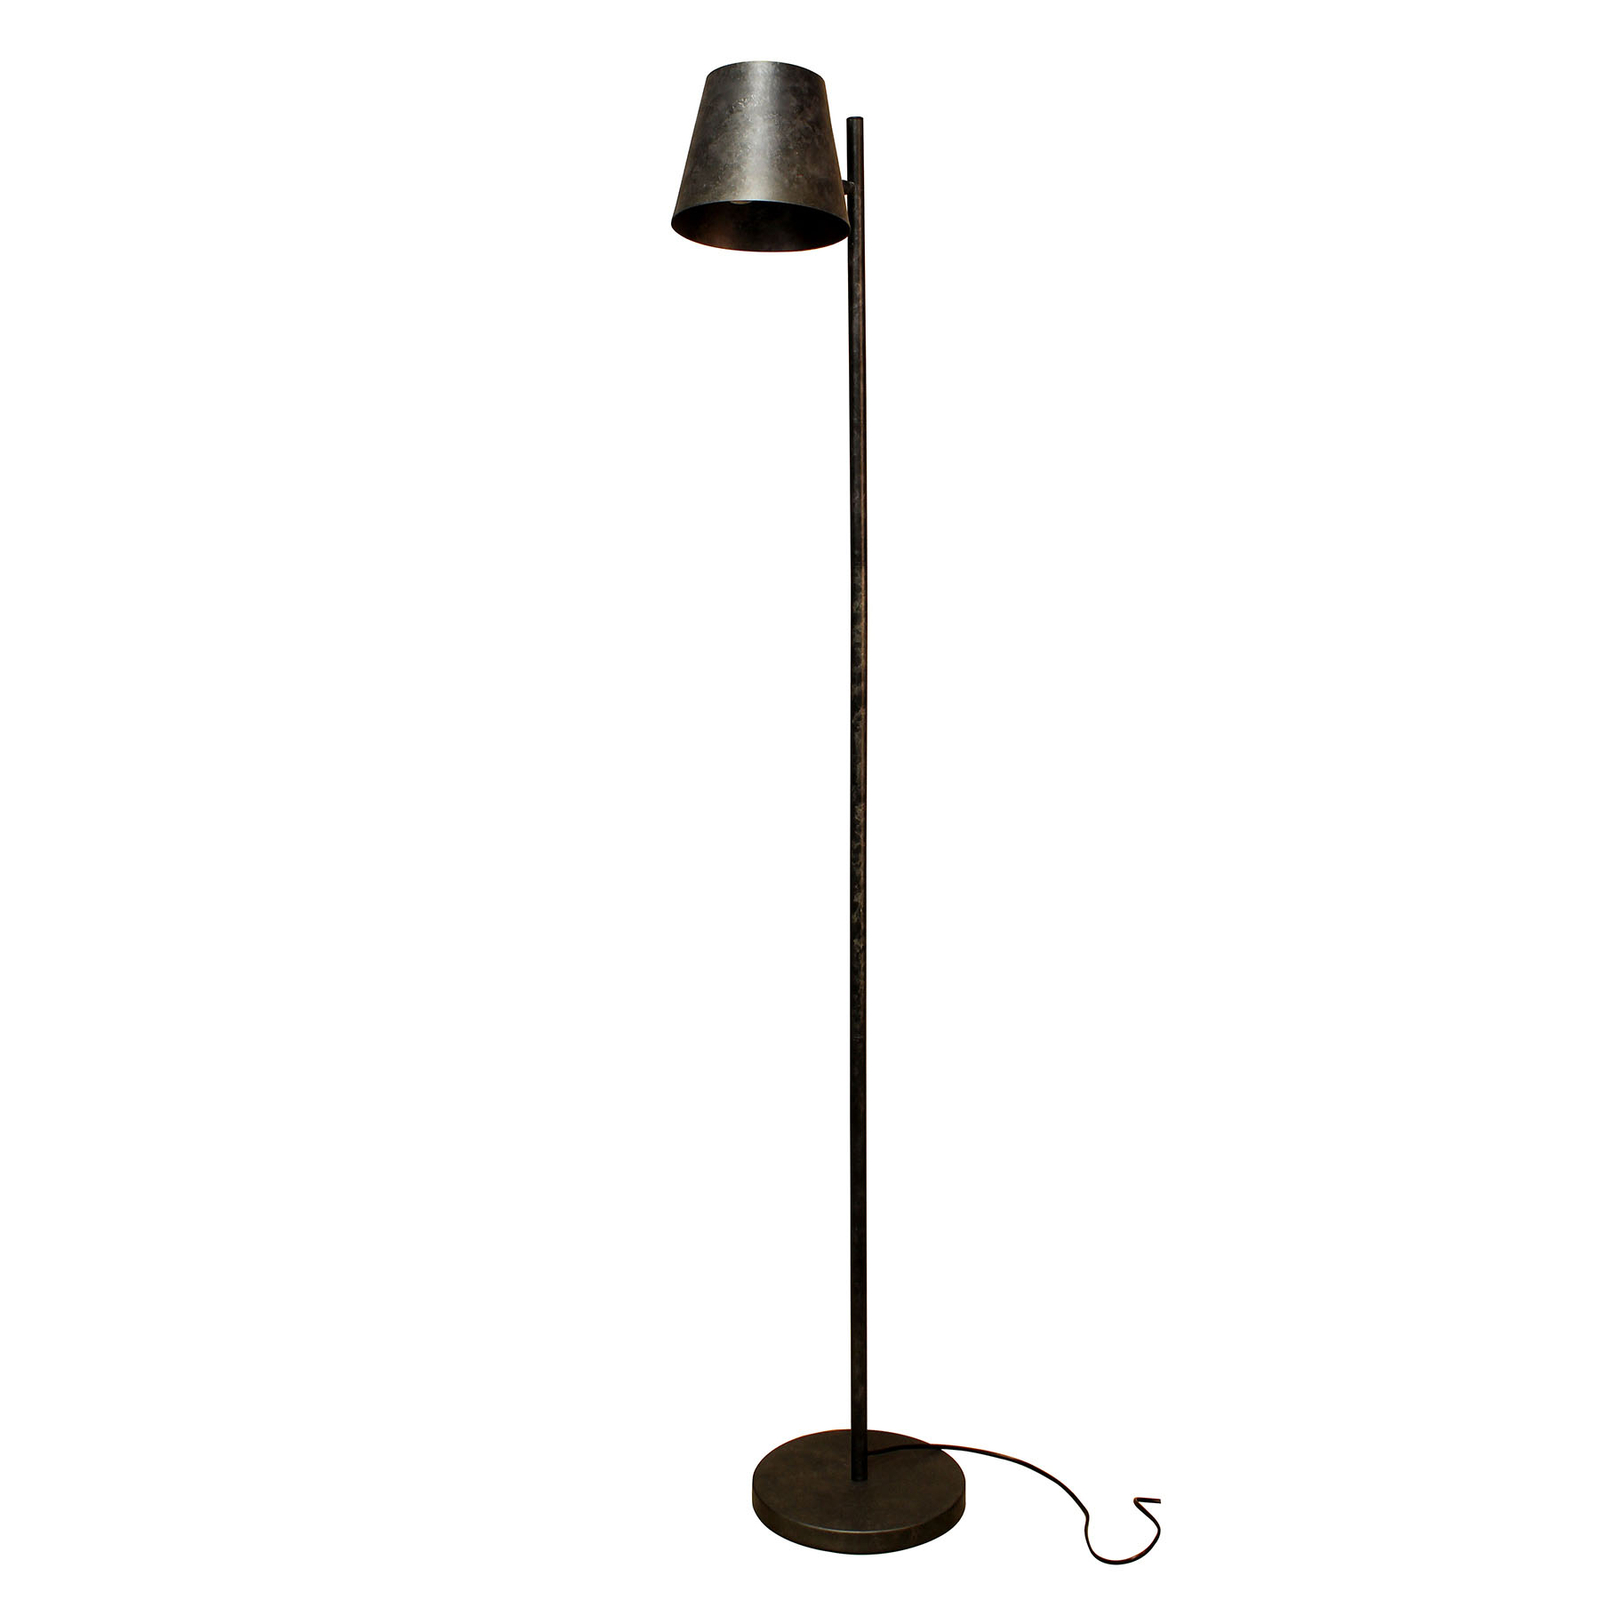 Colt floor lamp, one-bulb, frost-grey